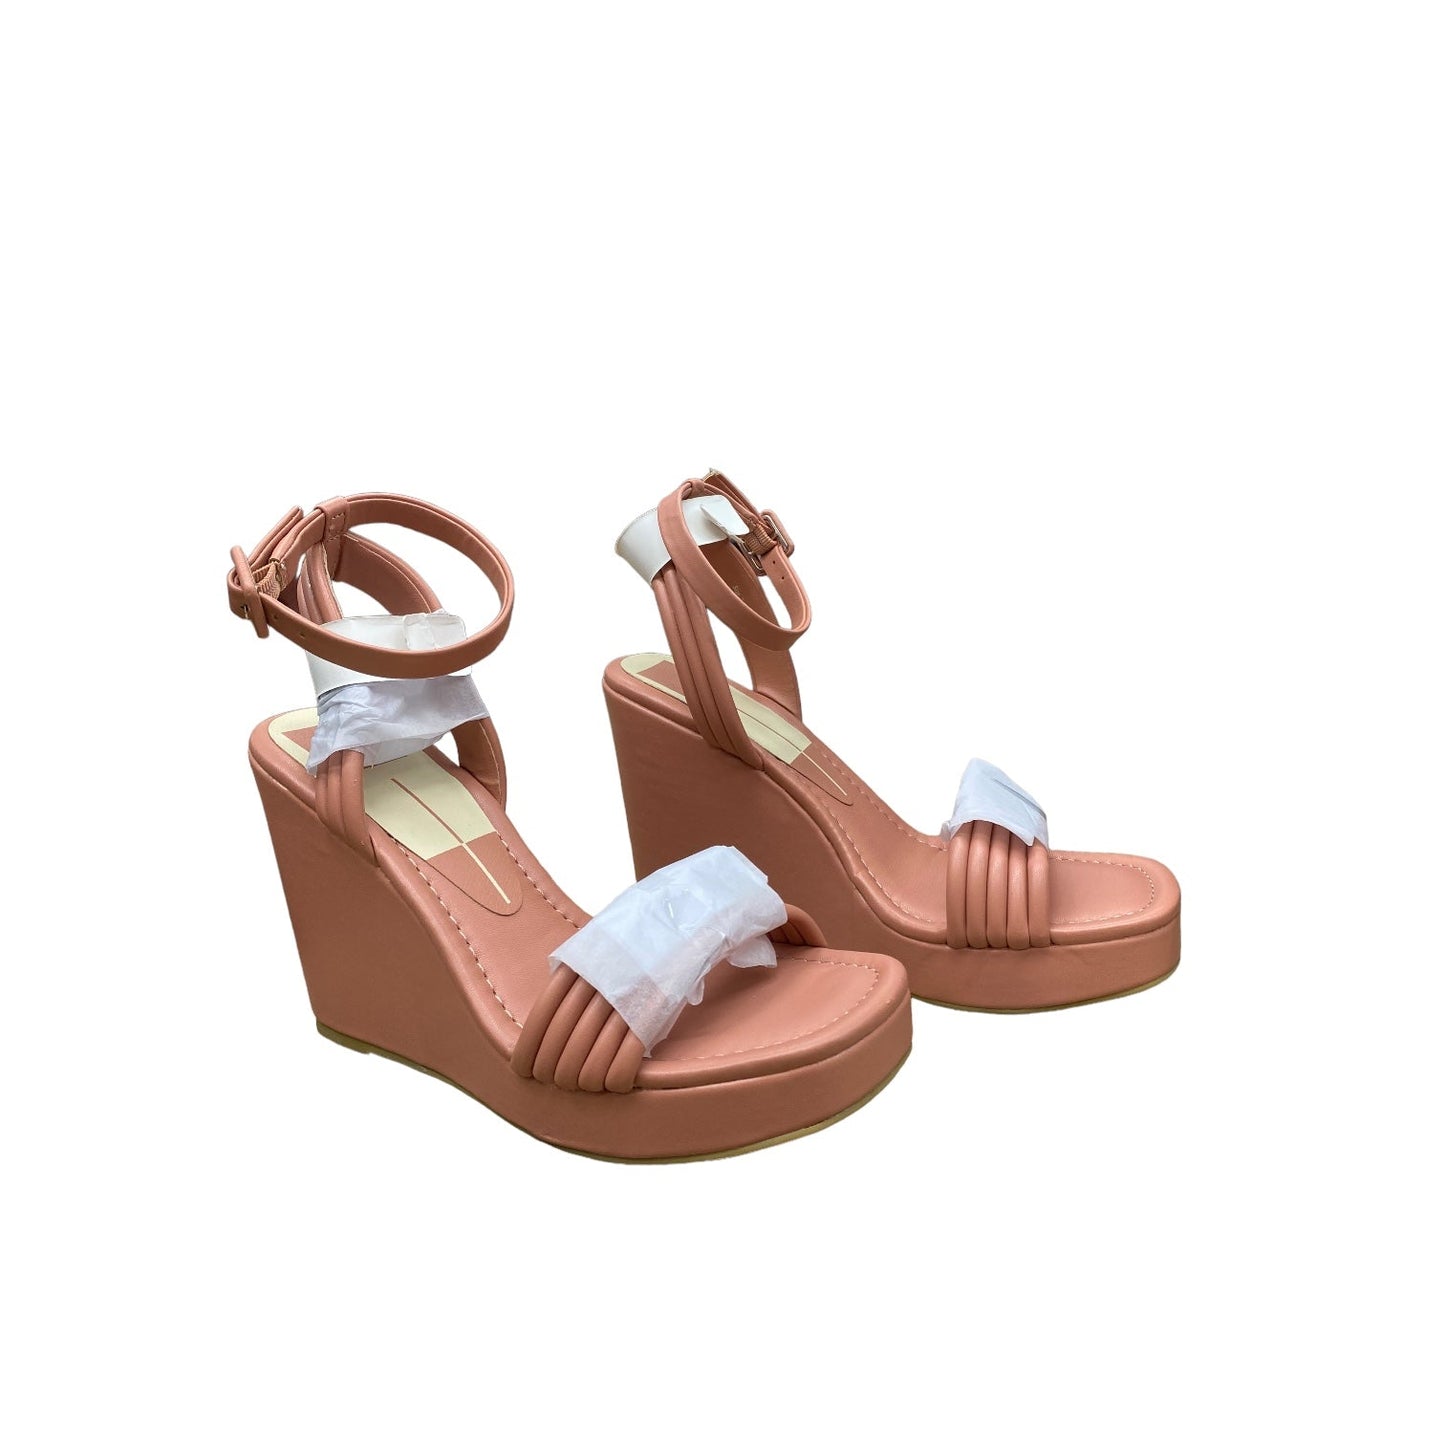 Sandals Heels Wedge By Dolce Vita  Size: 7.5